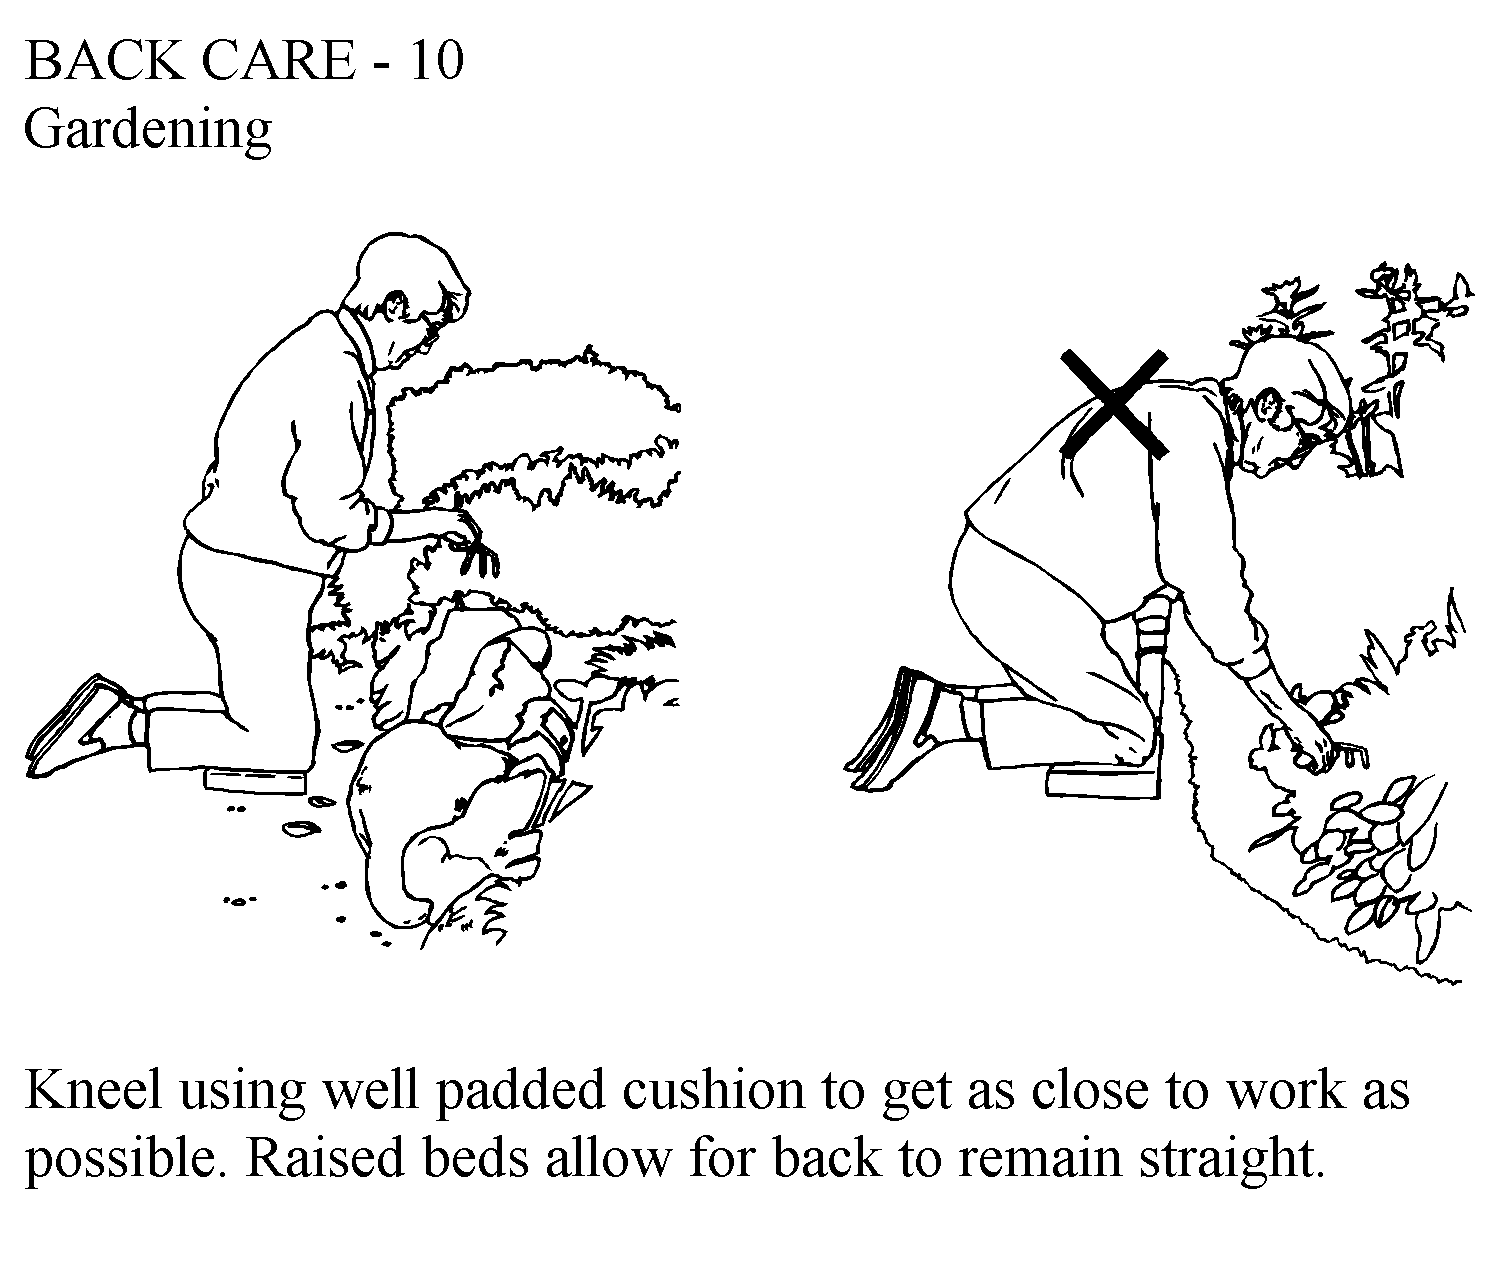 Image of woman gardening when kneeling on pad compared to woman bending at the spine